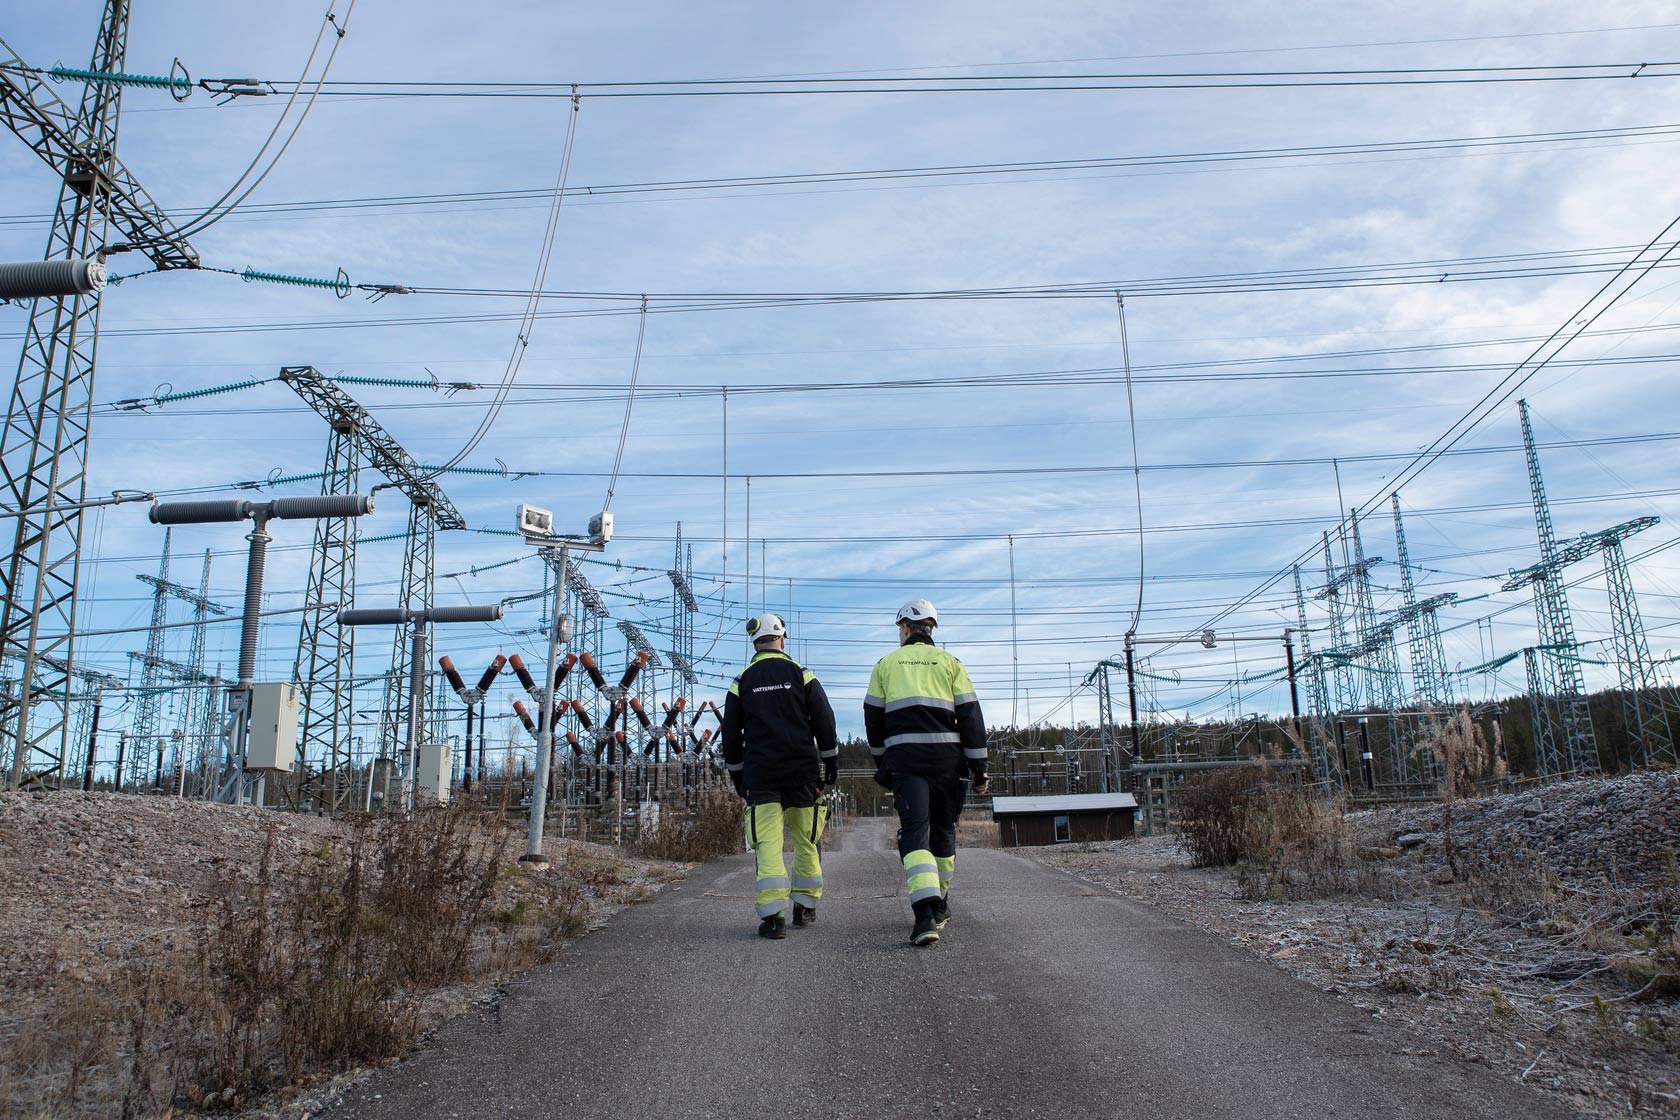 Two Vattenfall employees at Harsprånget power plant